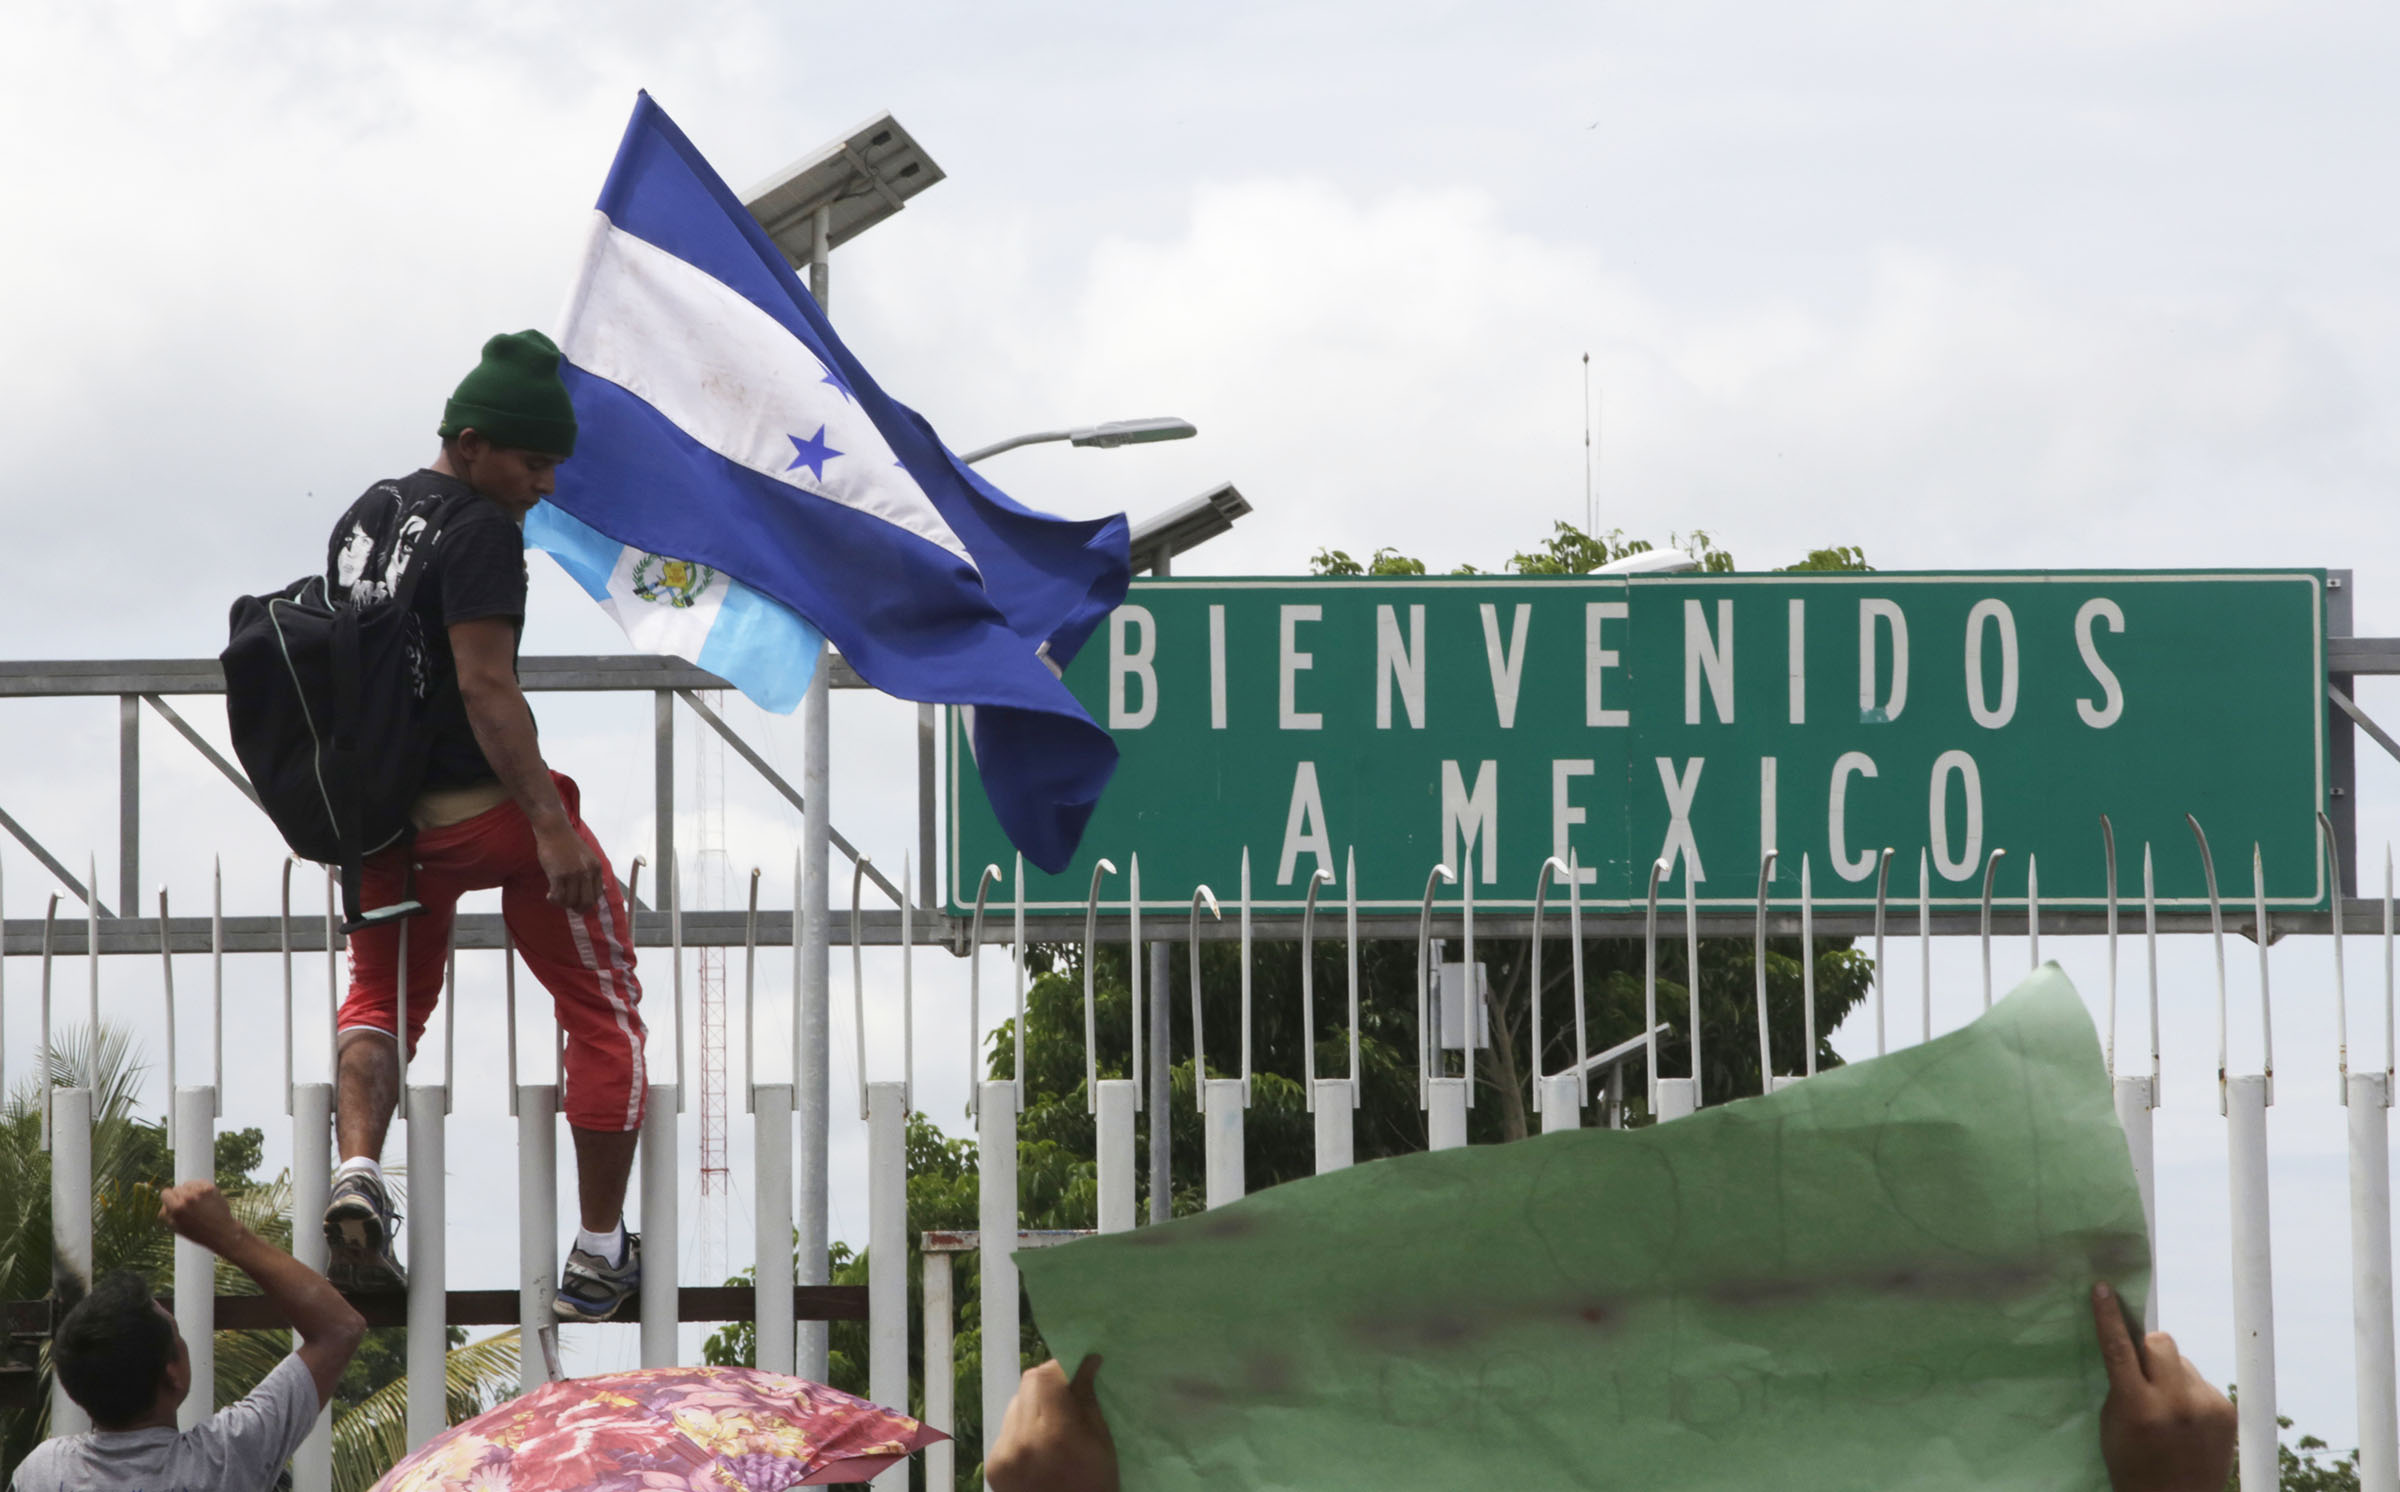 Migrants force through fence as they try to cross border into Mexico